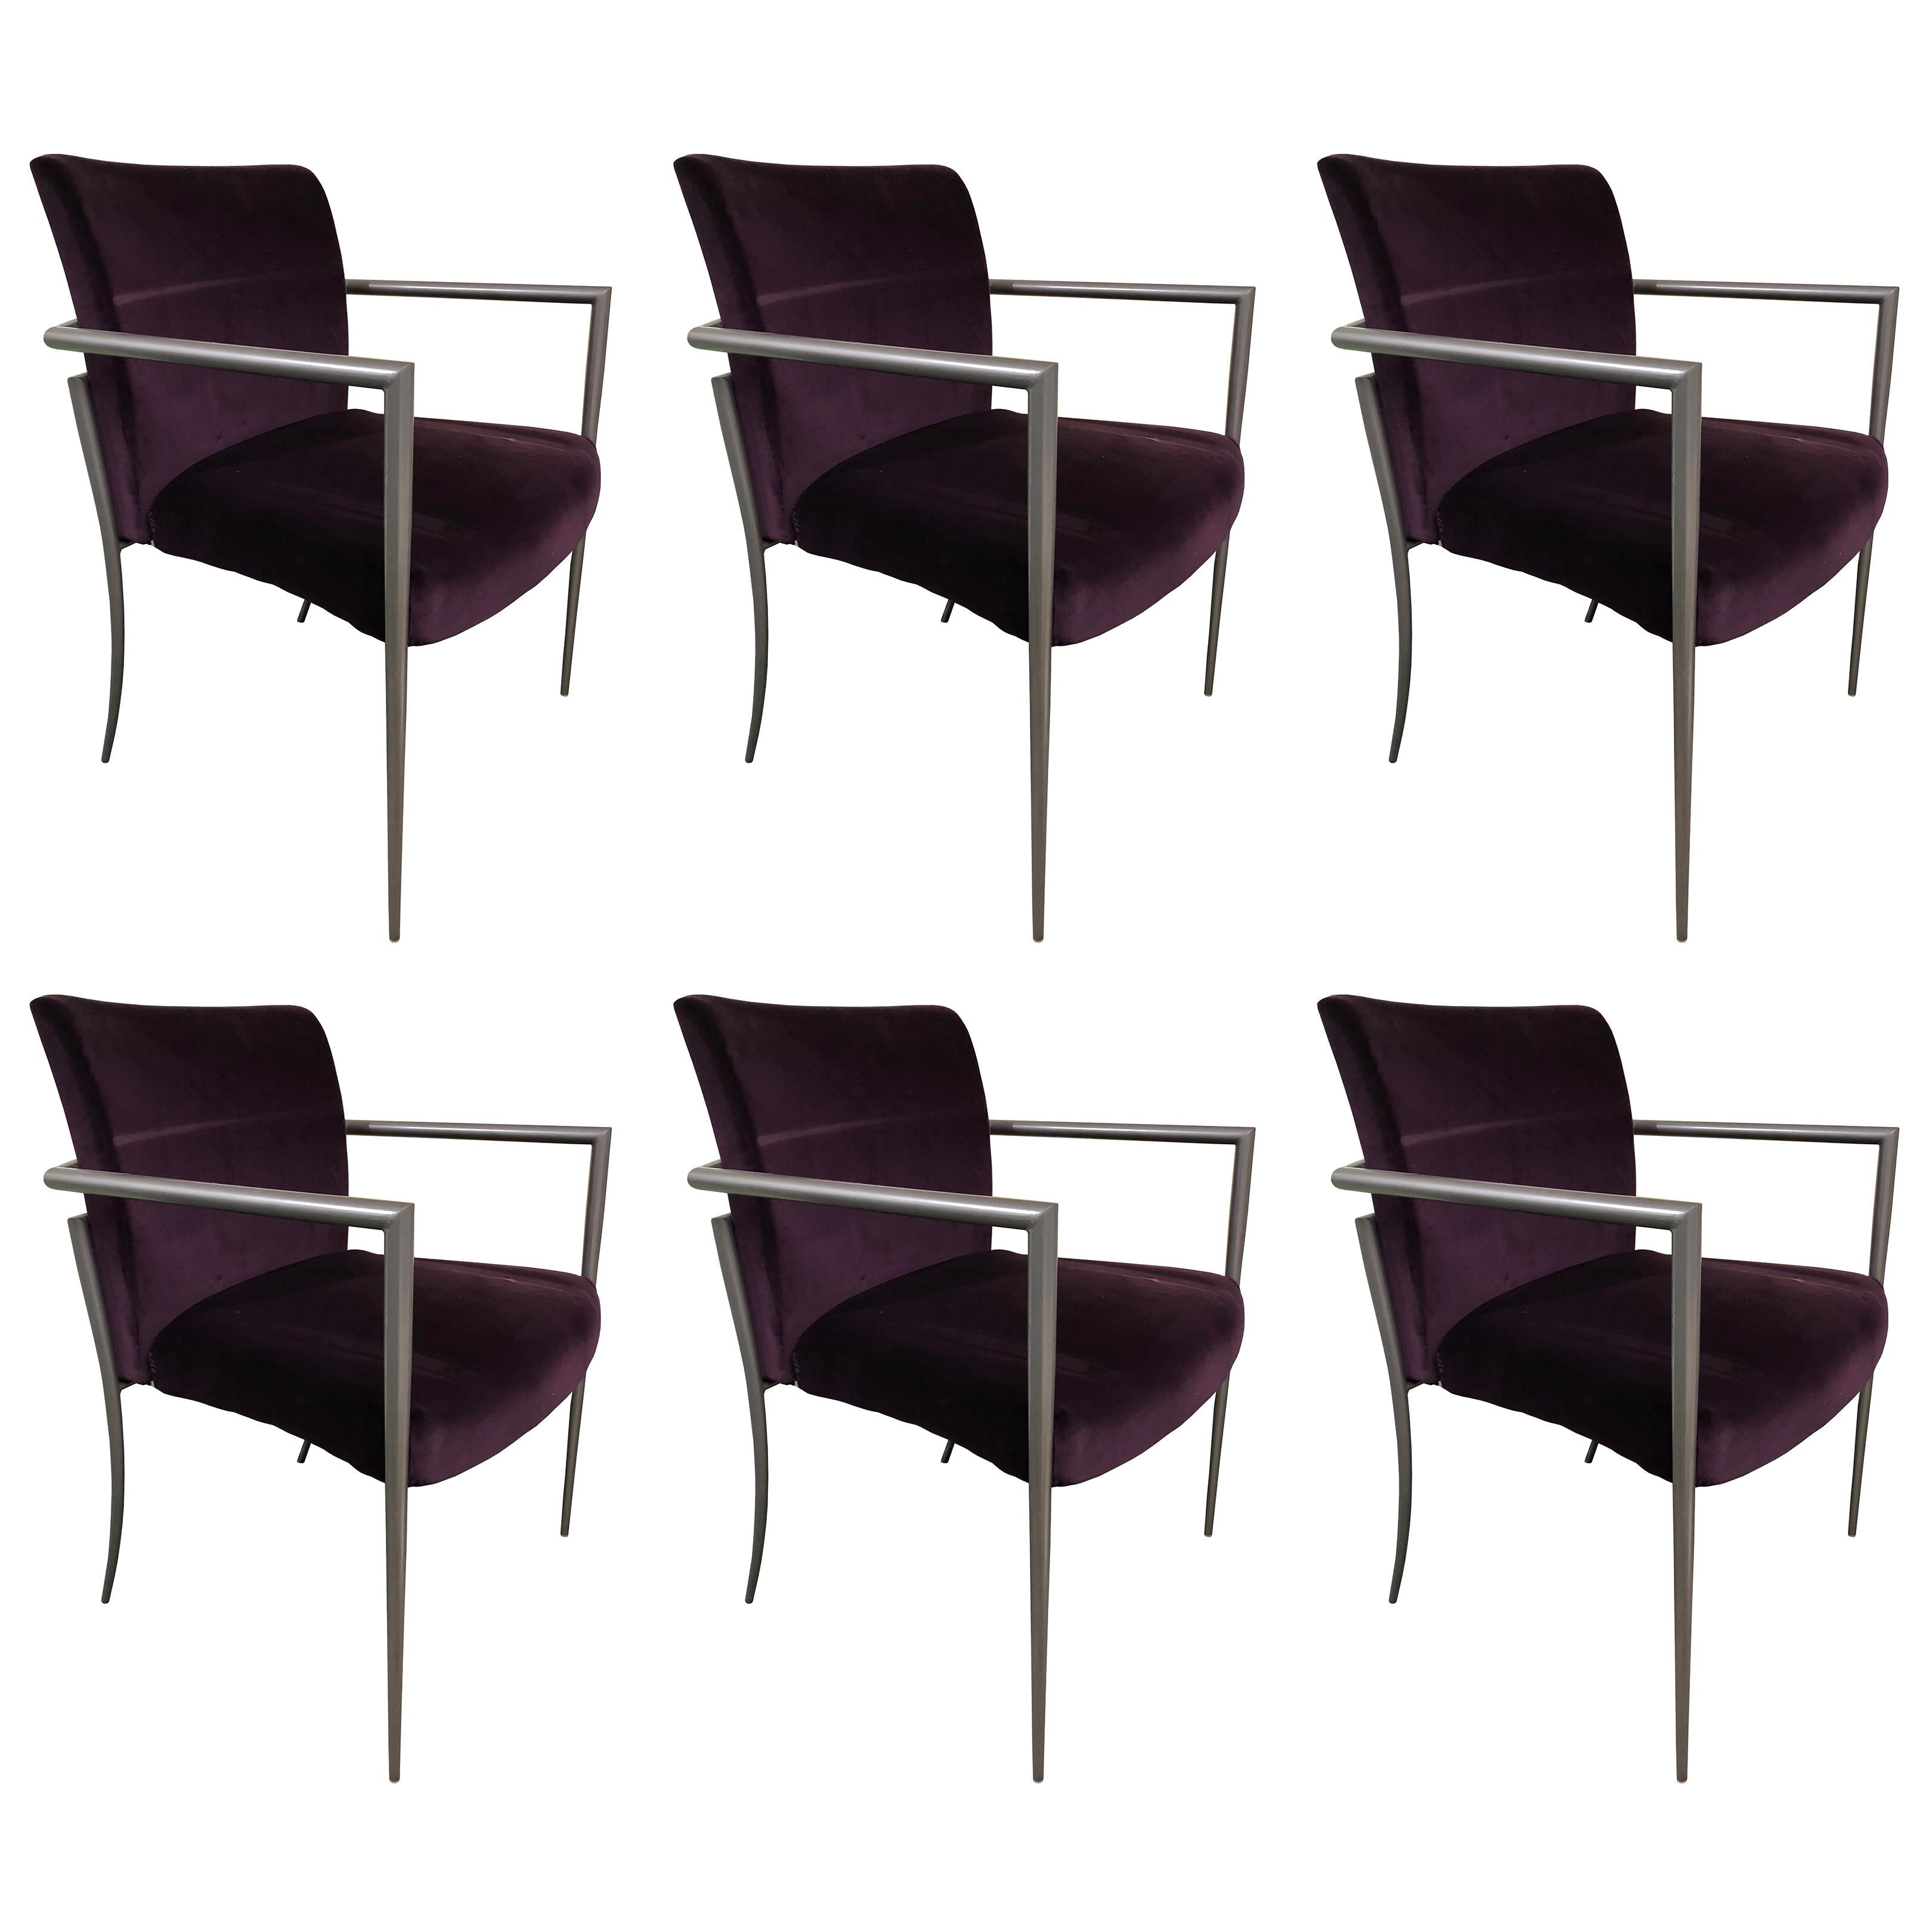 Set of 6 Cortona Guest Staking Chairs by Joe Ricchio for HBF